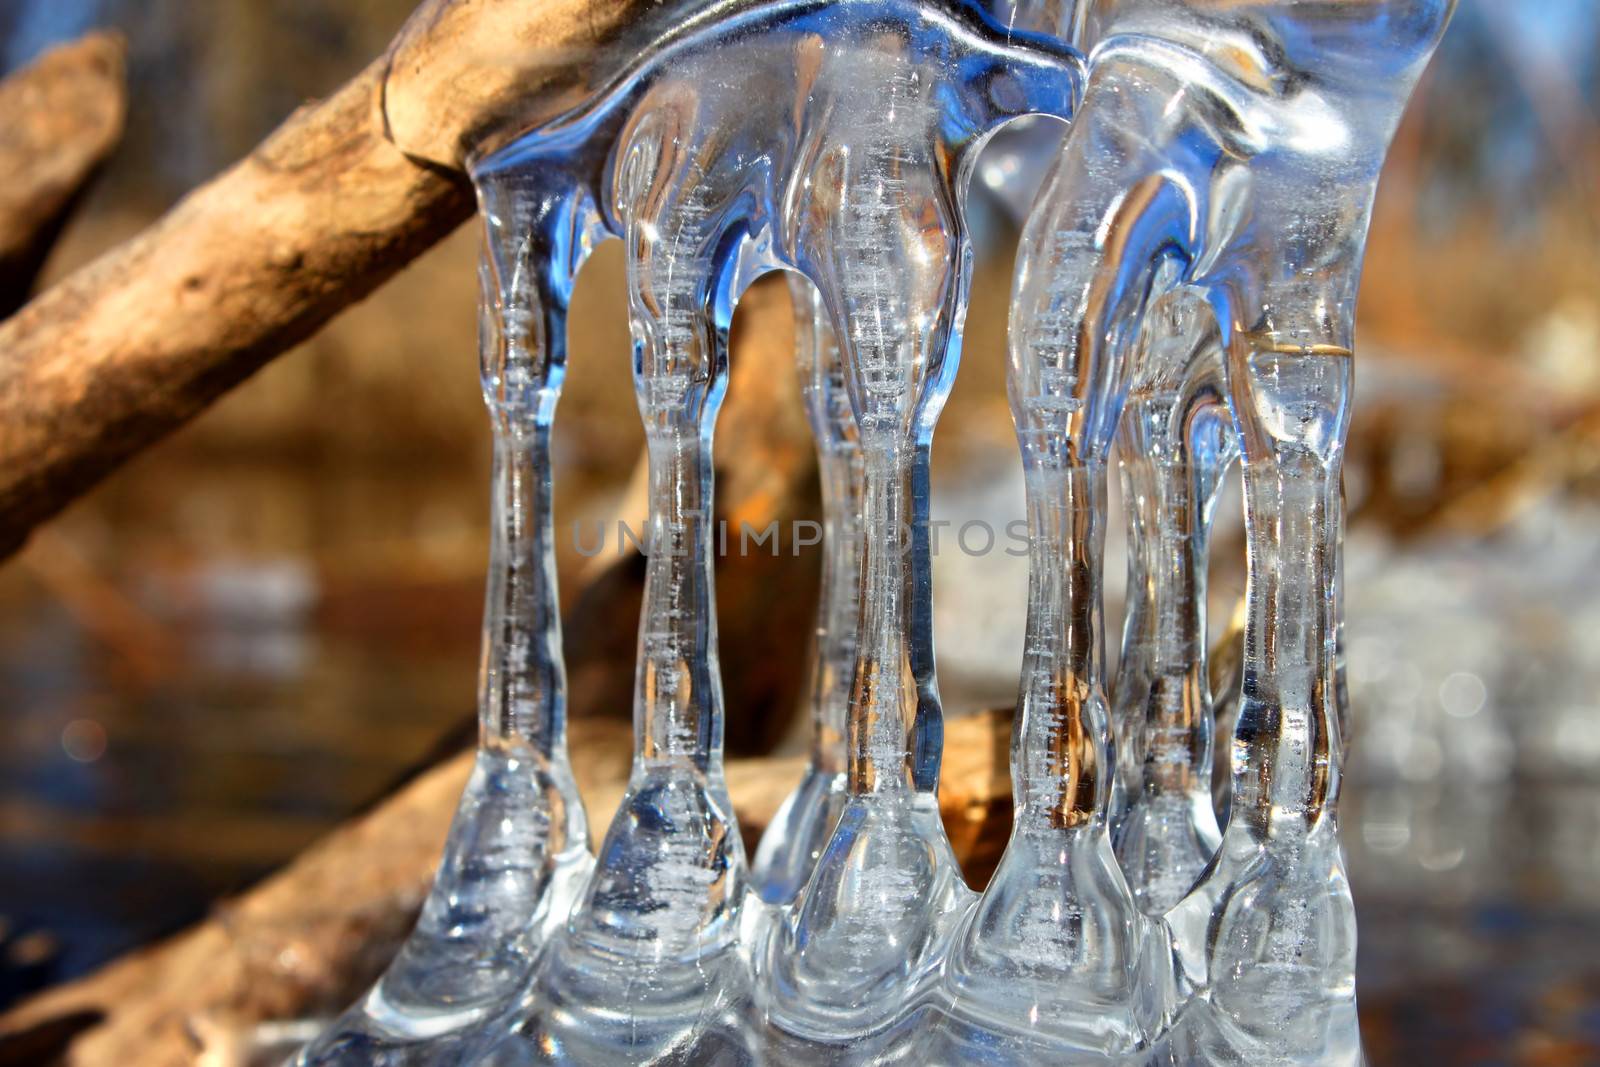 Natural ice sculptures along the Kishwaukee River in northern Illinois.